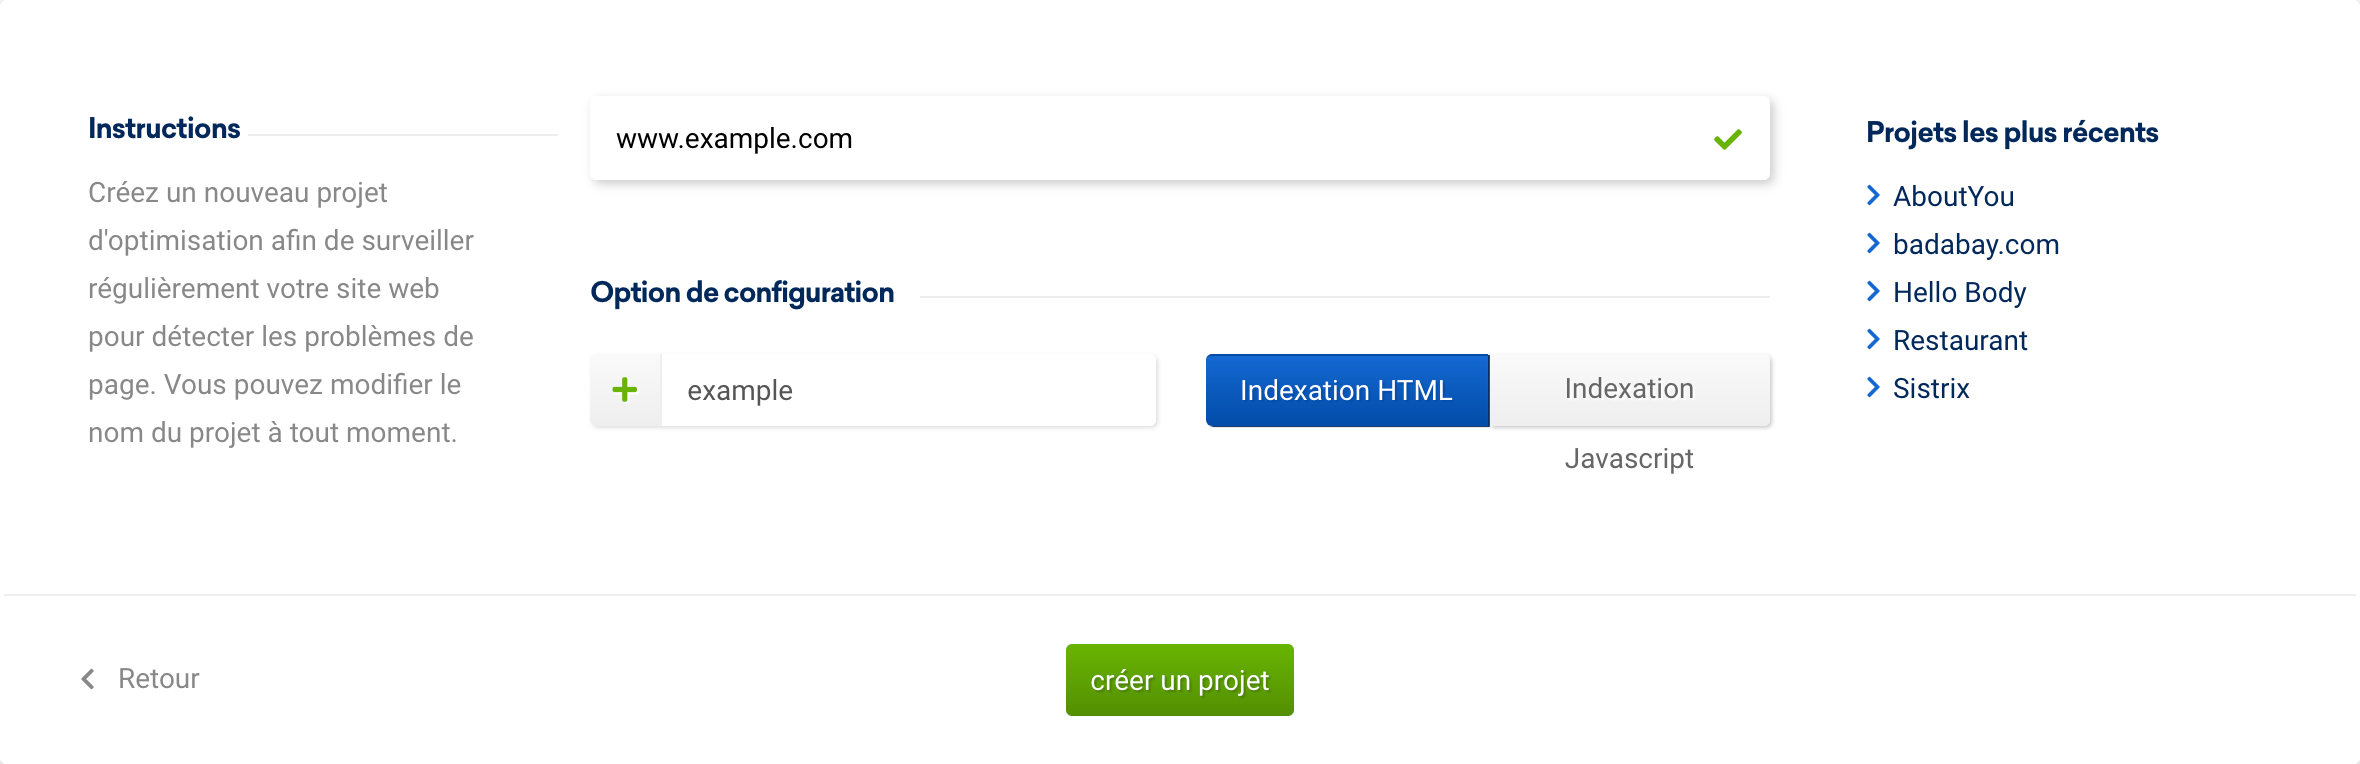 Step 1 - enter domain
Step 2 - project name